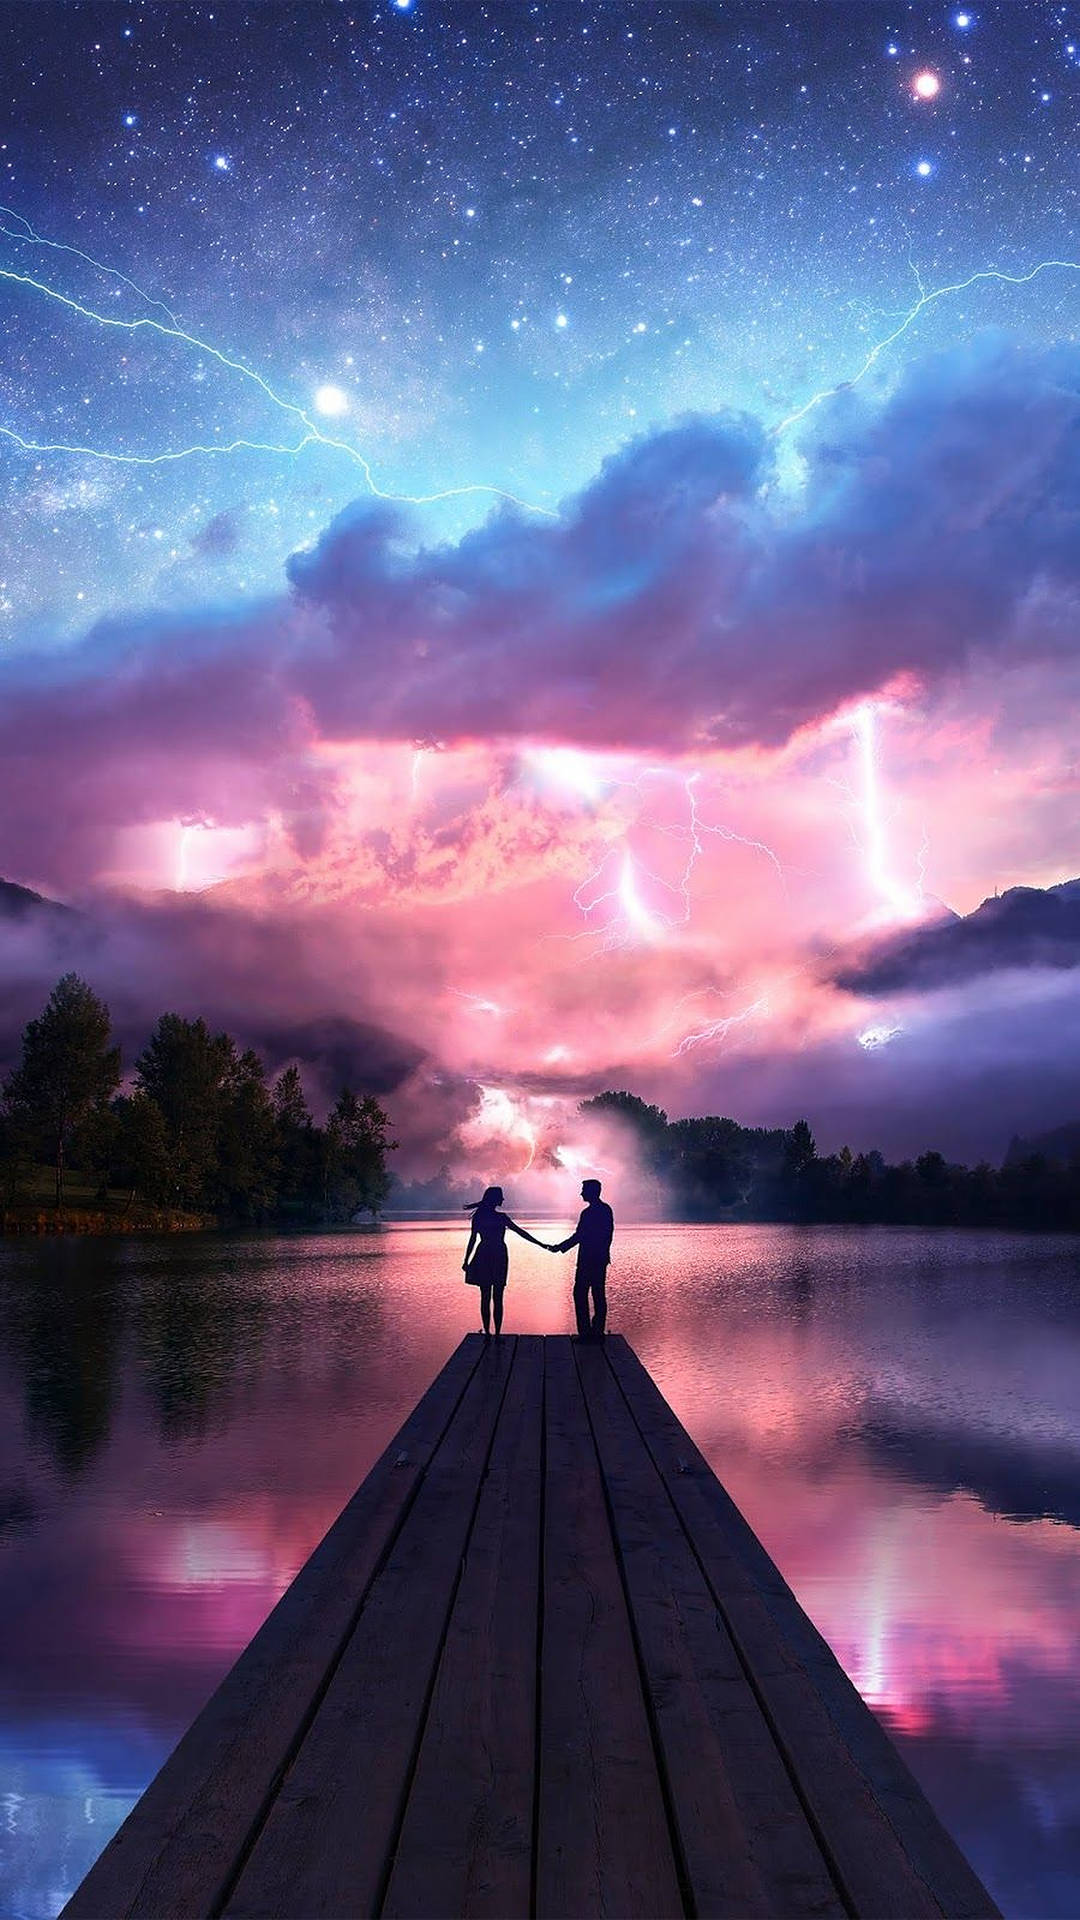 Couple Silhouette In Stormy Weather Background